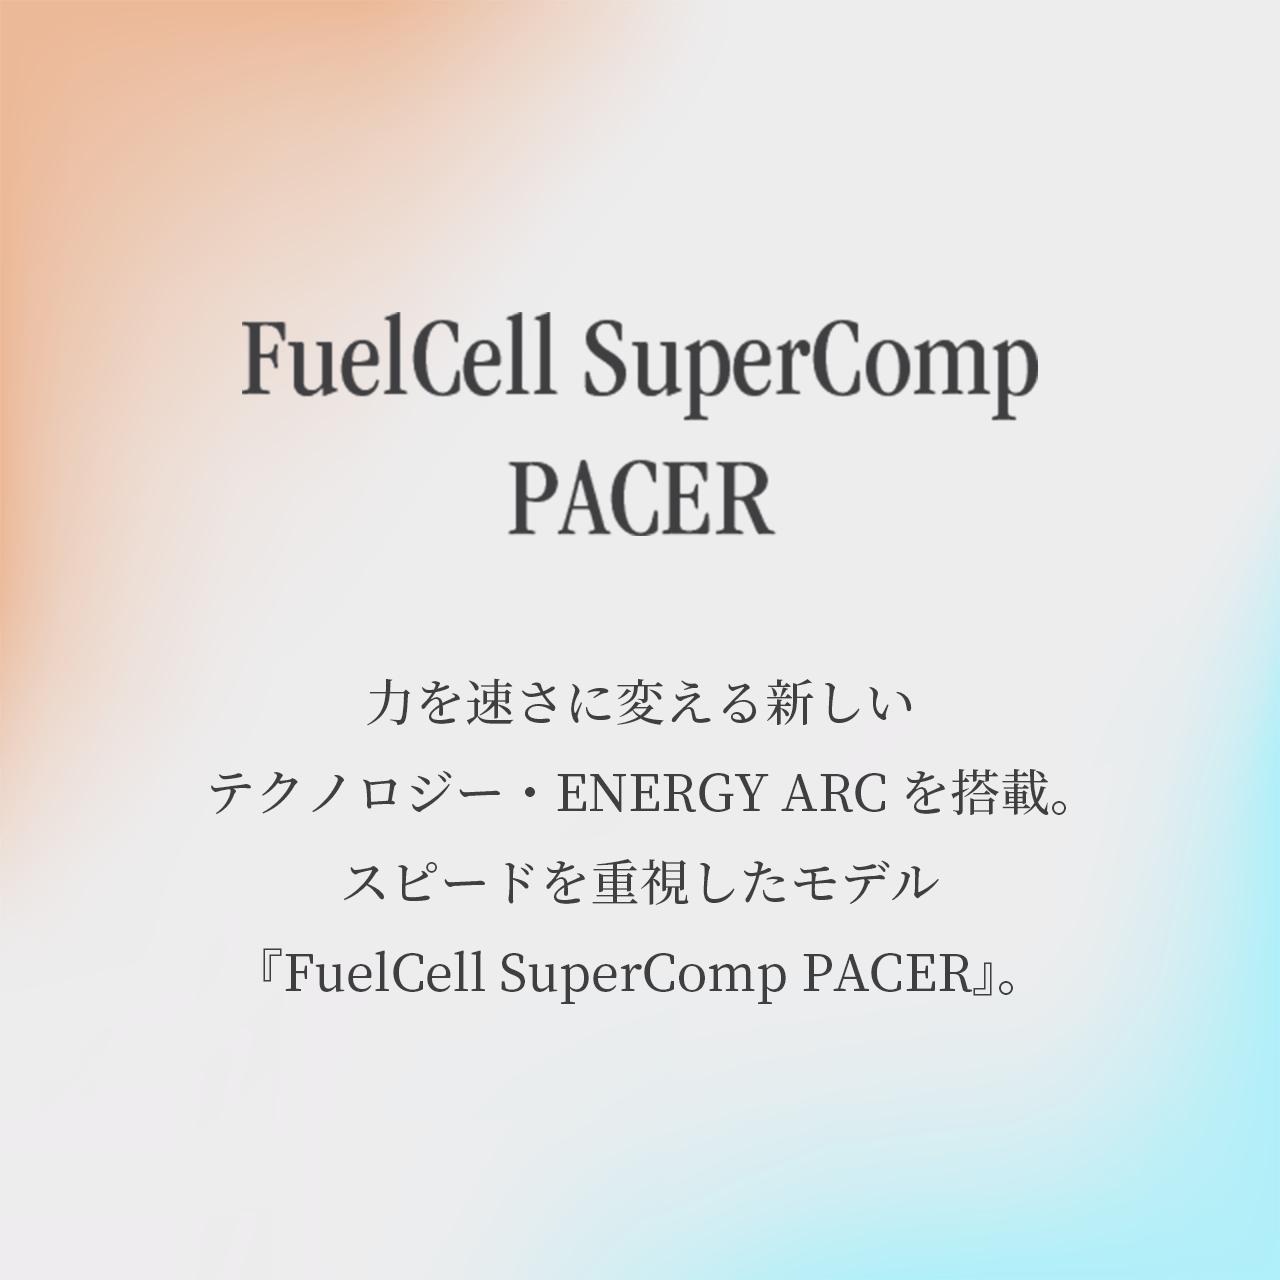 FuelCell SuperComp PACER 力を速さに変える新しいテクノロジー・ENERGY ARCを搭載。スピードを重視したモデル『FuelCell SuperComp PACER』。